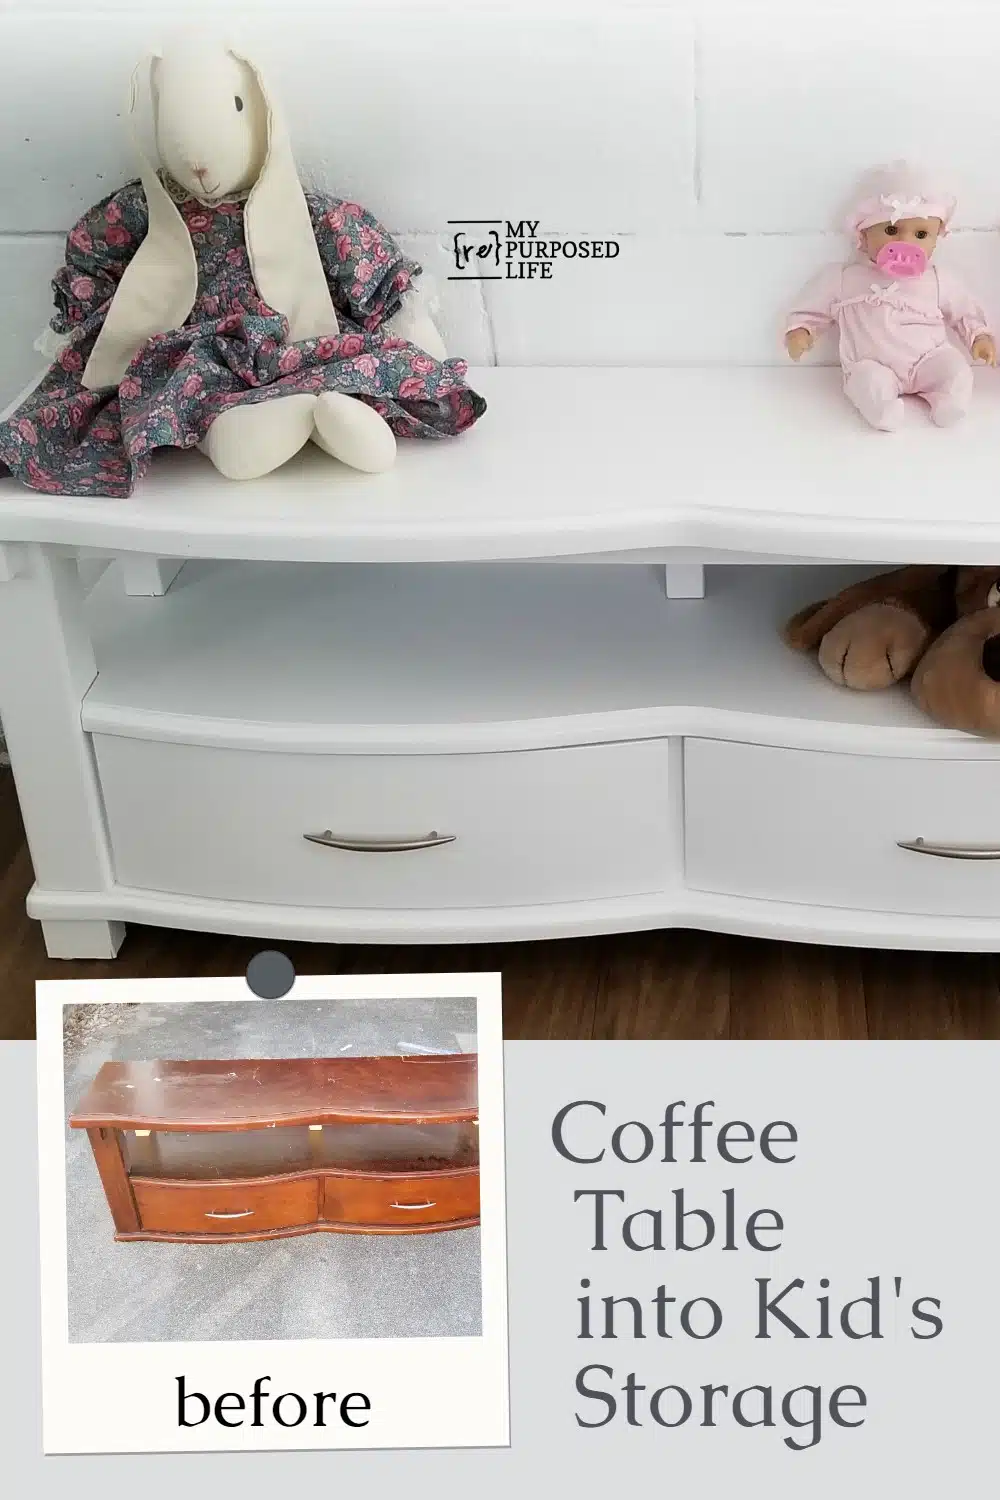 Wow! When you have a free over sized coffee table, wouldn't you cut it in half to make 2 benches? The first bench is perfect for a kid's storage bench. Room for toys, books and more. The shiny white semi-gloss paint will go with any decor. Complete directions on how to cut a cheap coffee table and make it strong enough to sit on. #MyRepurposedLife #repurposed #furniture #kids #bench #storage #organization via @repurposedlife